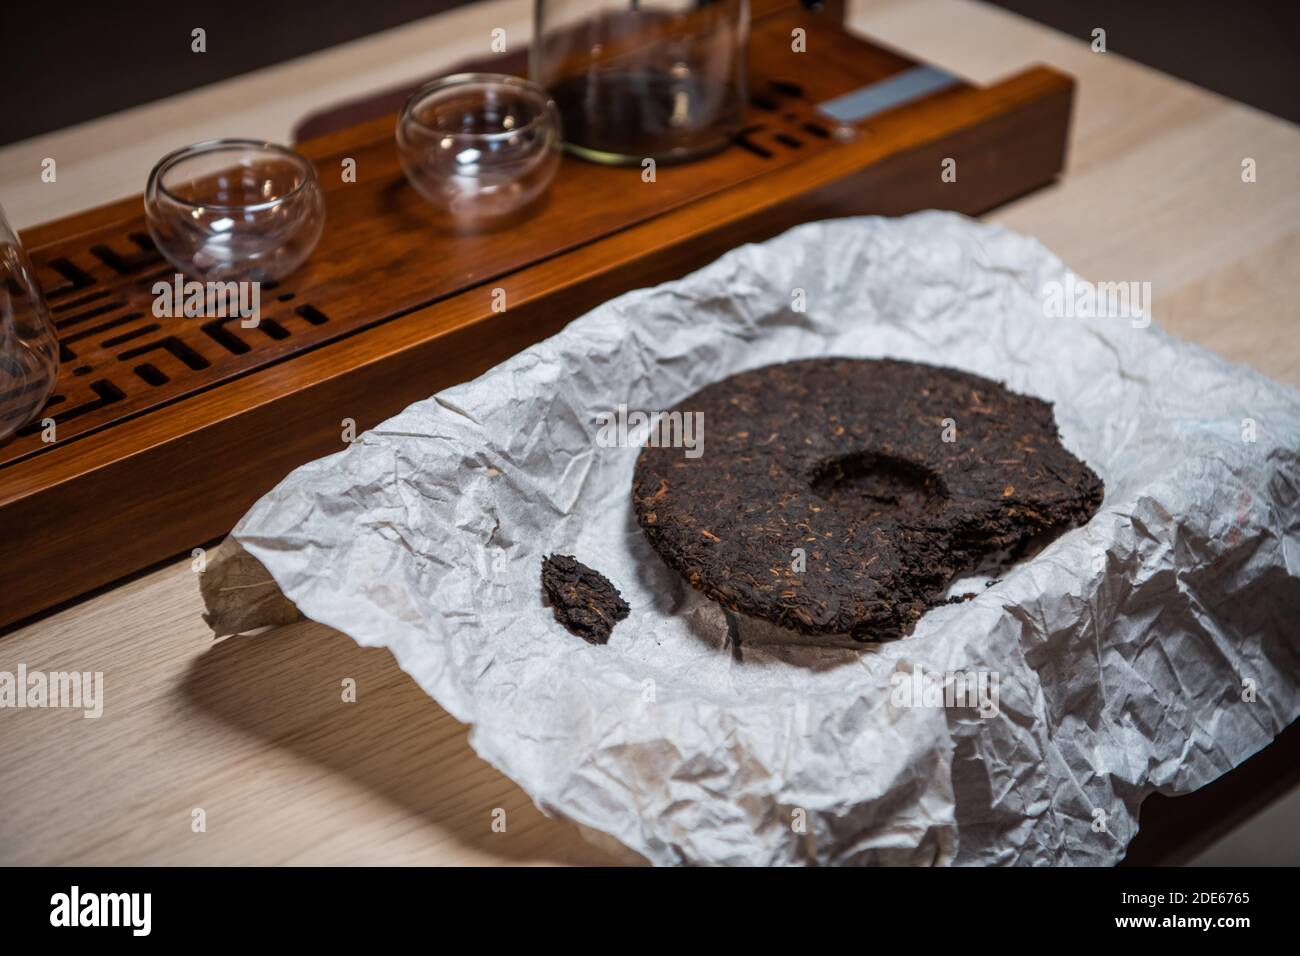 Close Up Of A Tea Cake Of Real Eastern Pu Erh Tea On The Table In A Paper Wrapper Stock Photo Alamy